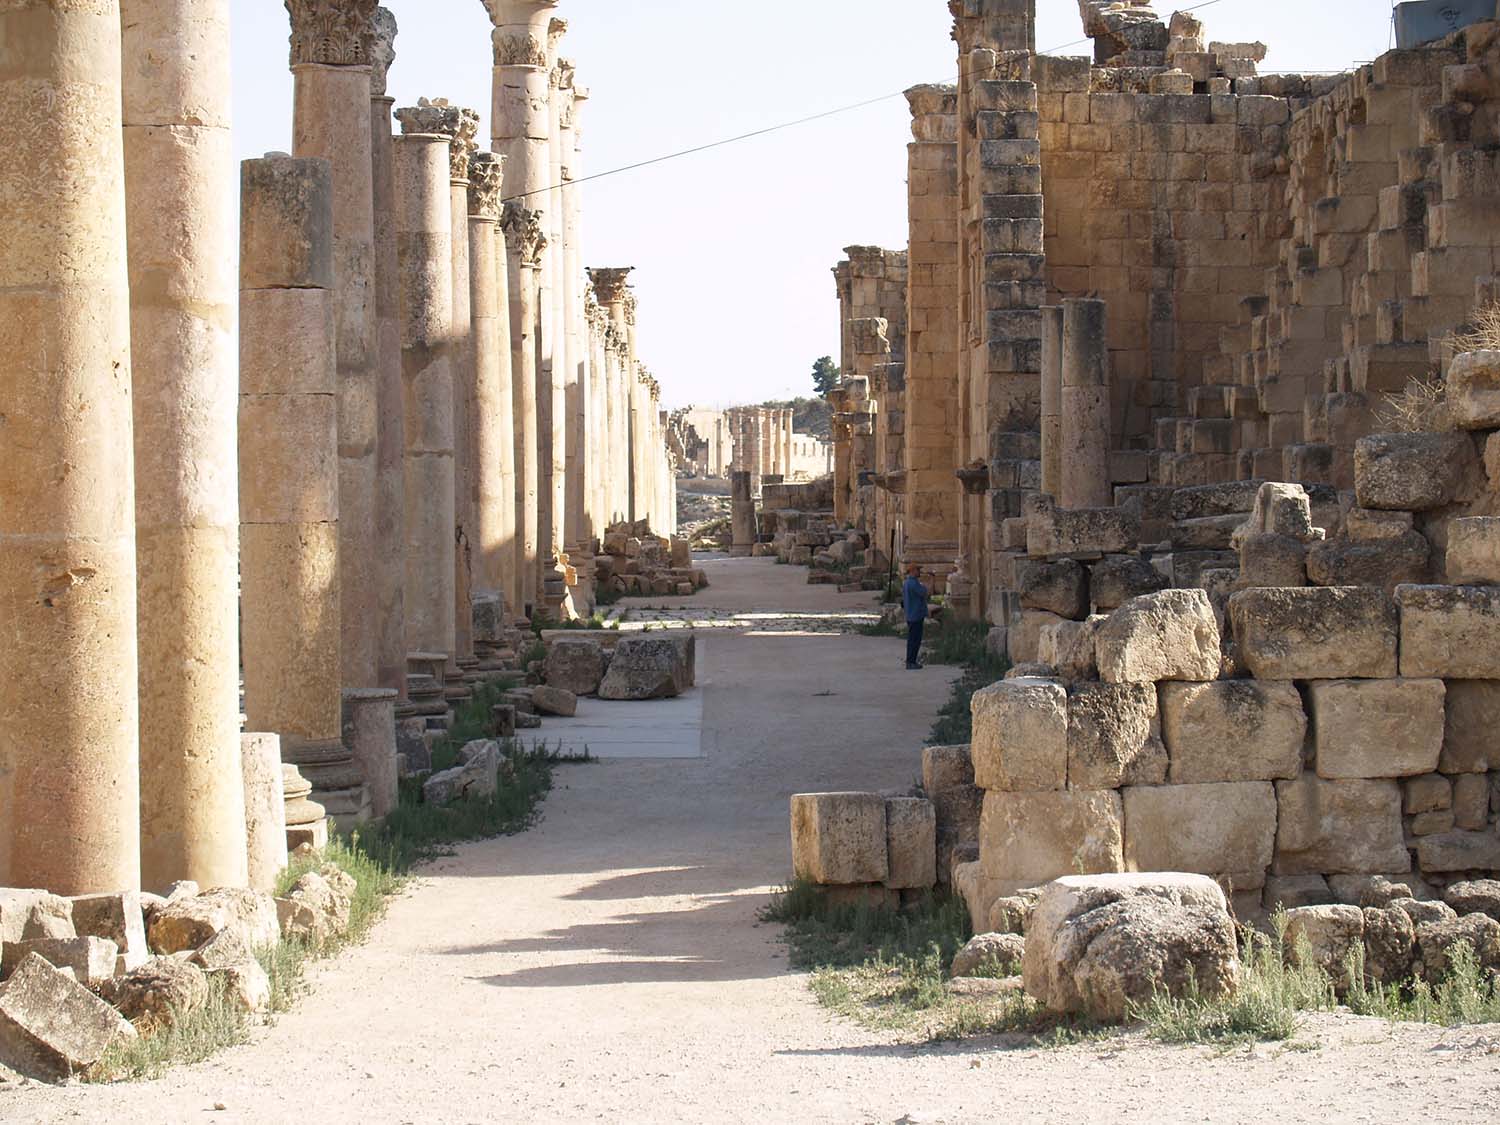 Southward view, colonnade of Cardo Maximus on left, Sanctuary of Artemis on right